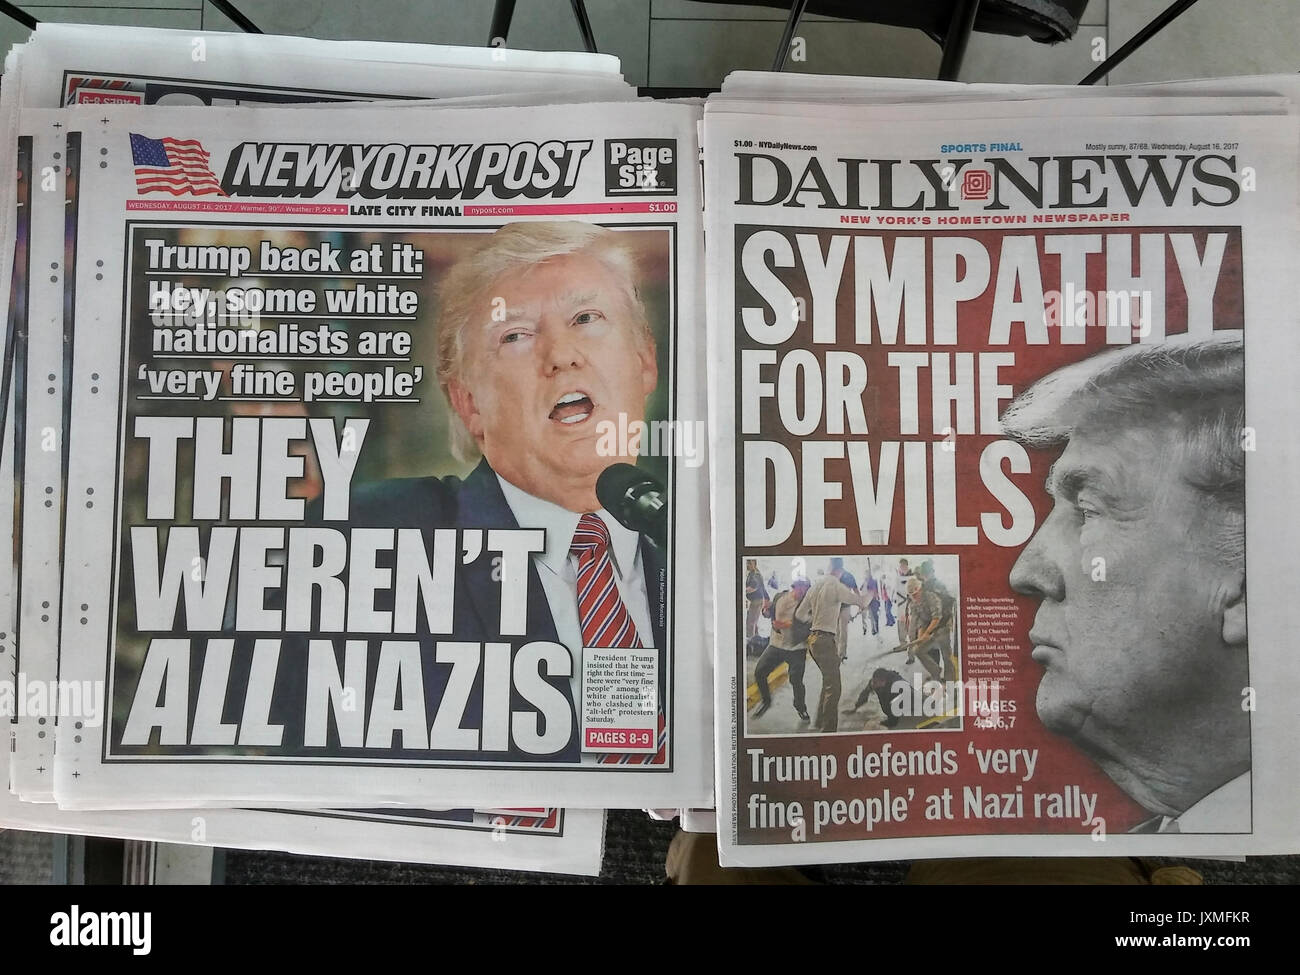 New York newspapers on Wednesday, August 16, 2017 report on the previous day's press conference where President Donald Trump's statements supported the alt-right, neo-Nazis and white supremacists at the melee in Charlottesville, Virginia. (© Richard B. Levine) Stock Photo